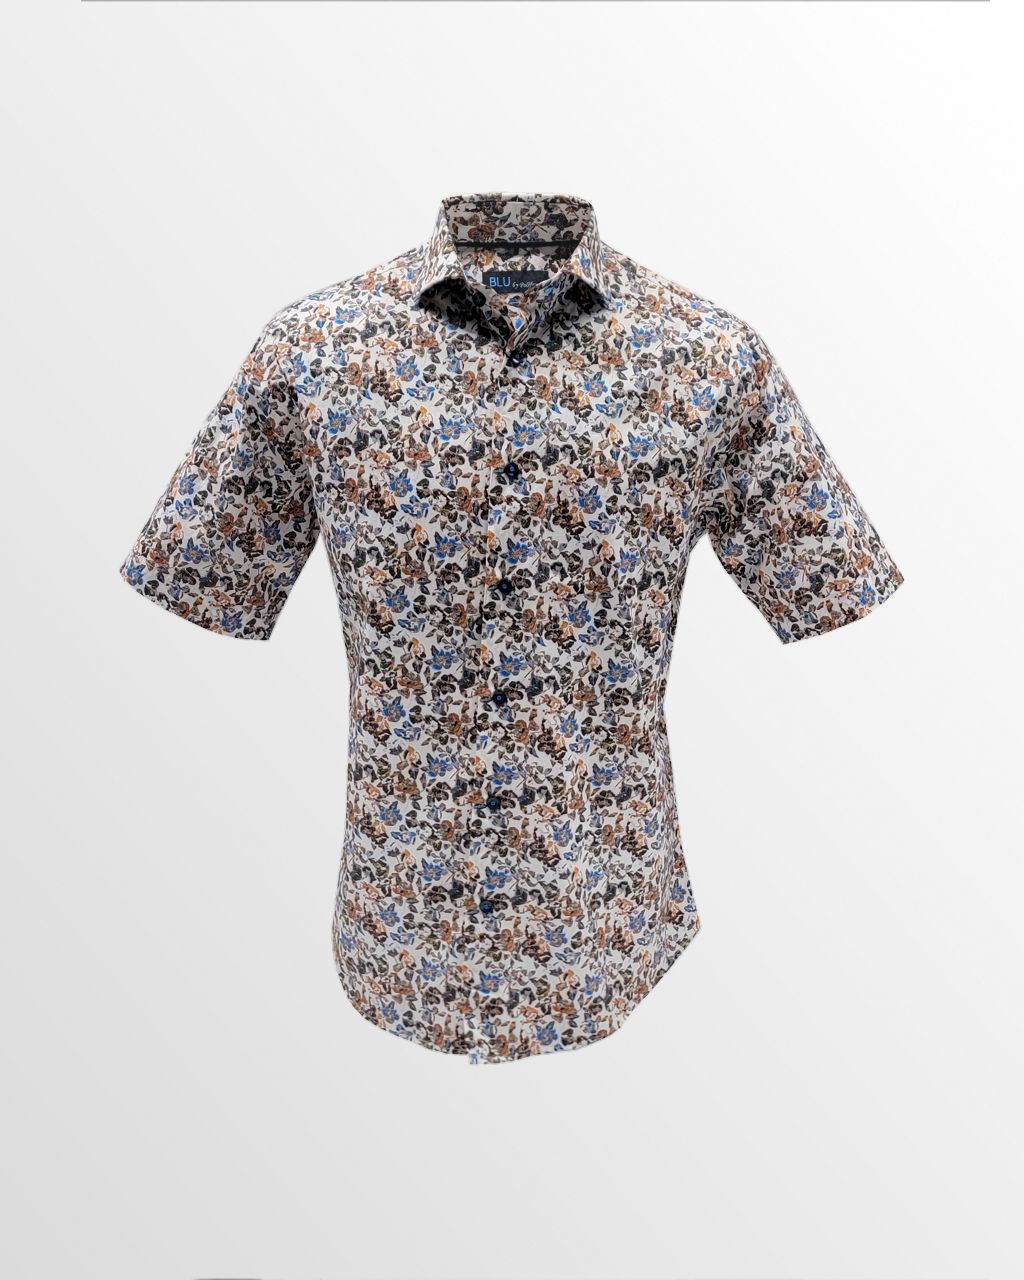 Polifroni Blu Short Sleeve Sport Shirt in Weathered Floral